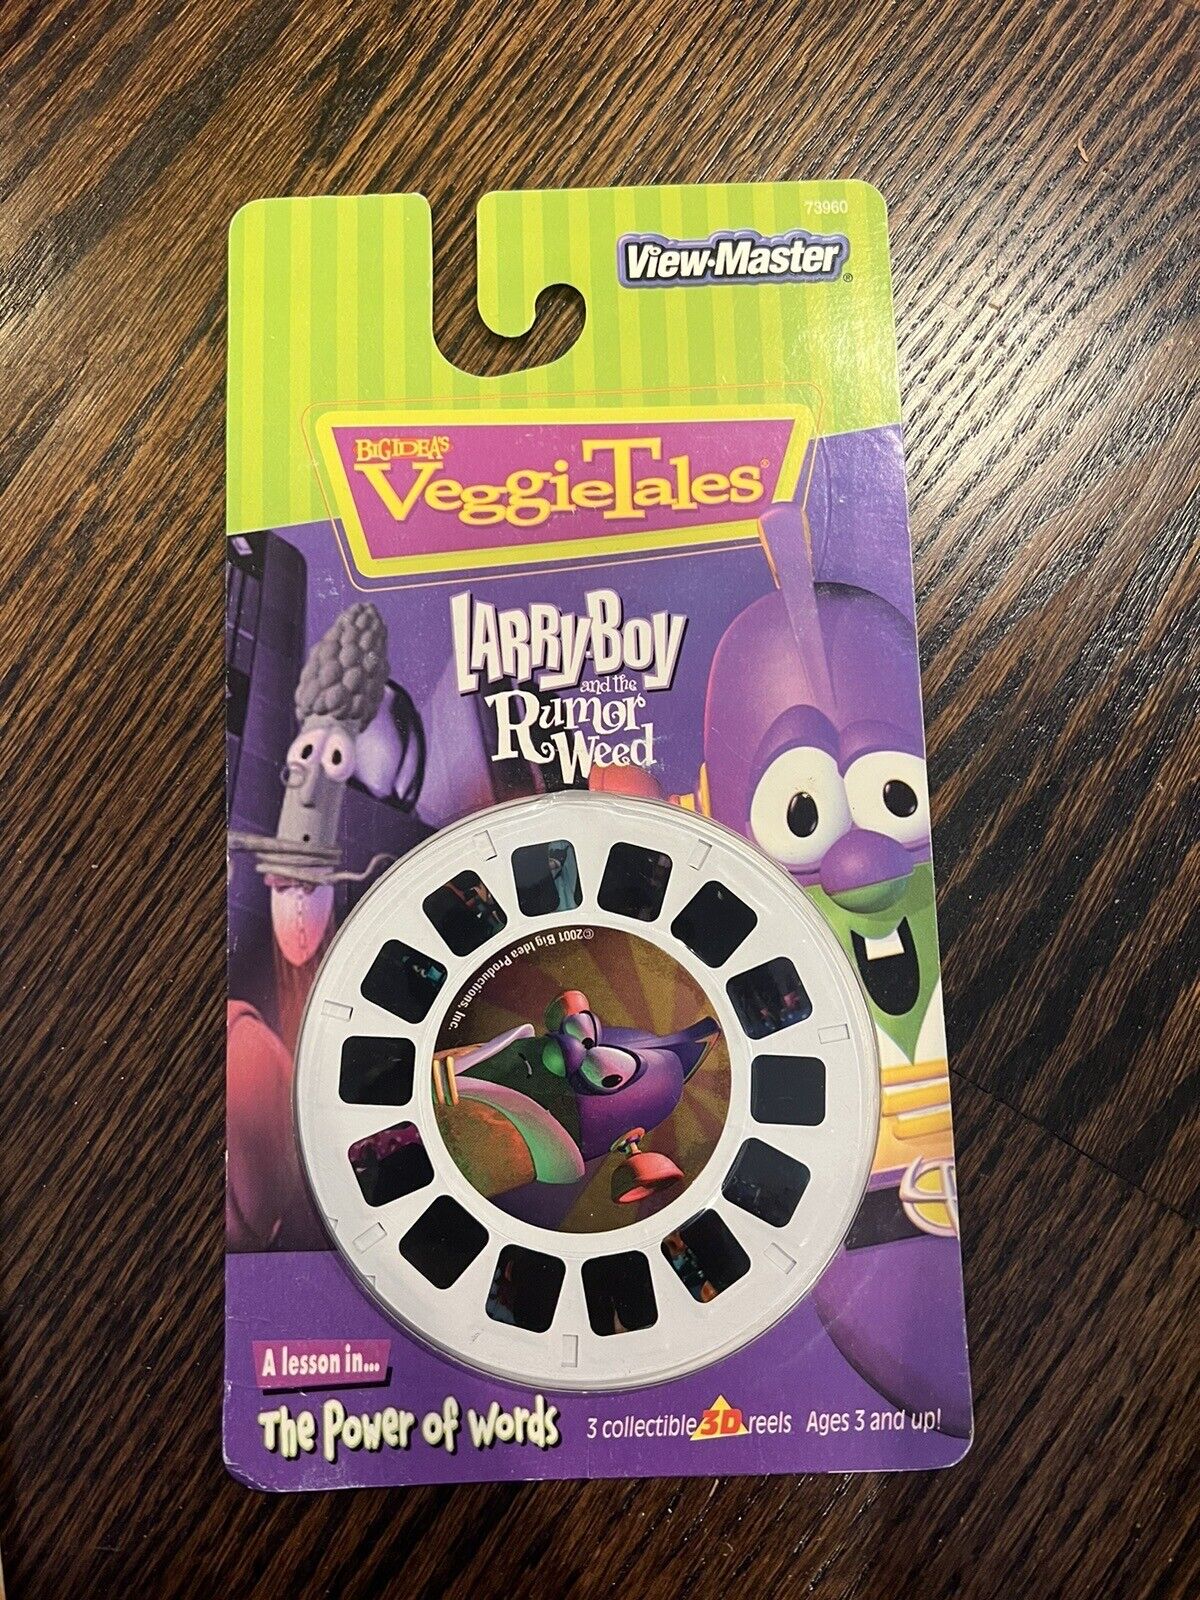 Veggie Tales Larry Boy and the Rumor Weed 3d View-Master 3 Reel Packet SEALED 